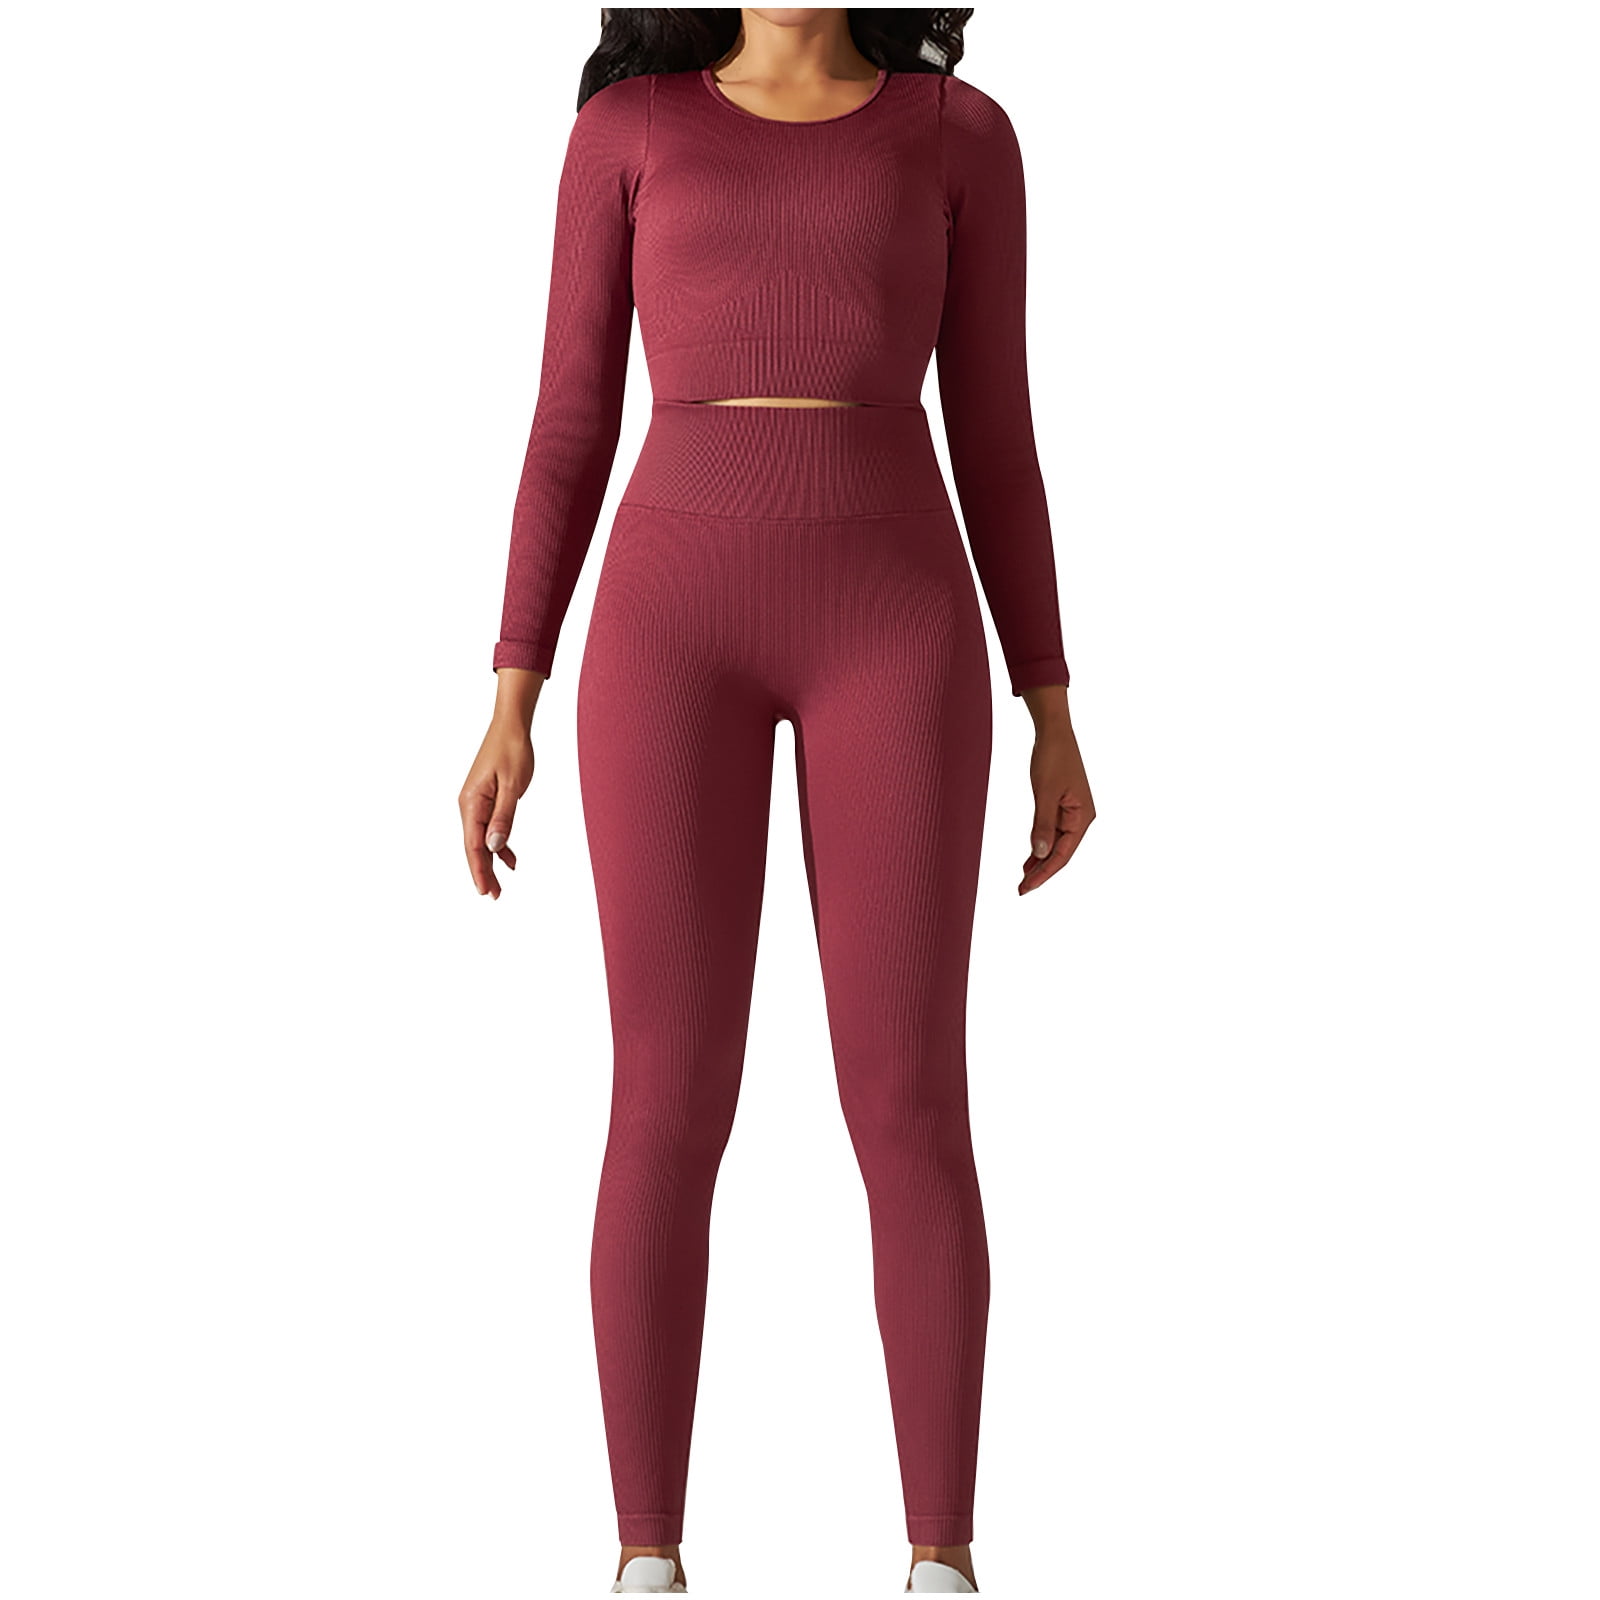 RYRJJ Seamless Workout Outfits for Women 2 Piece Ribbed Long